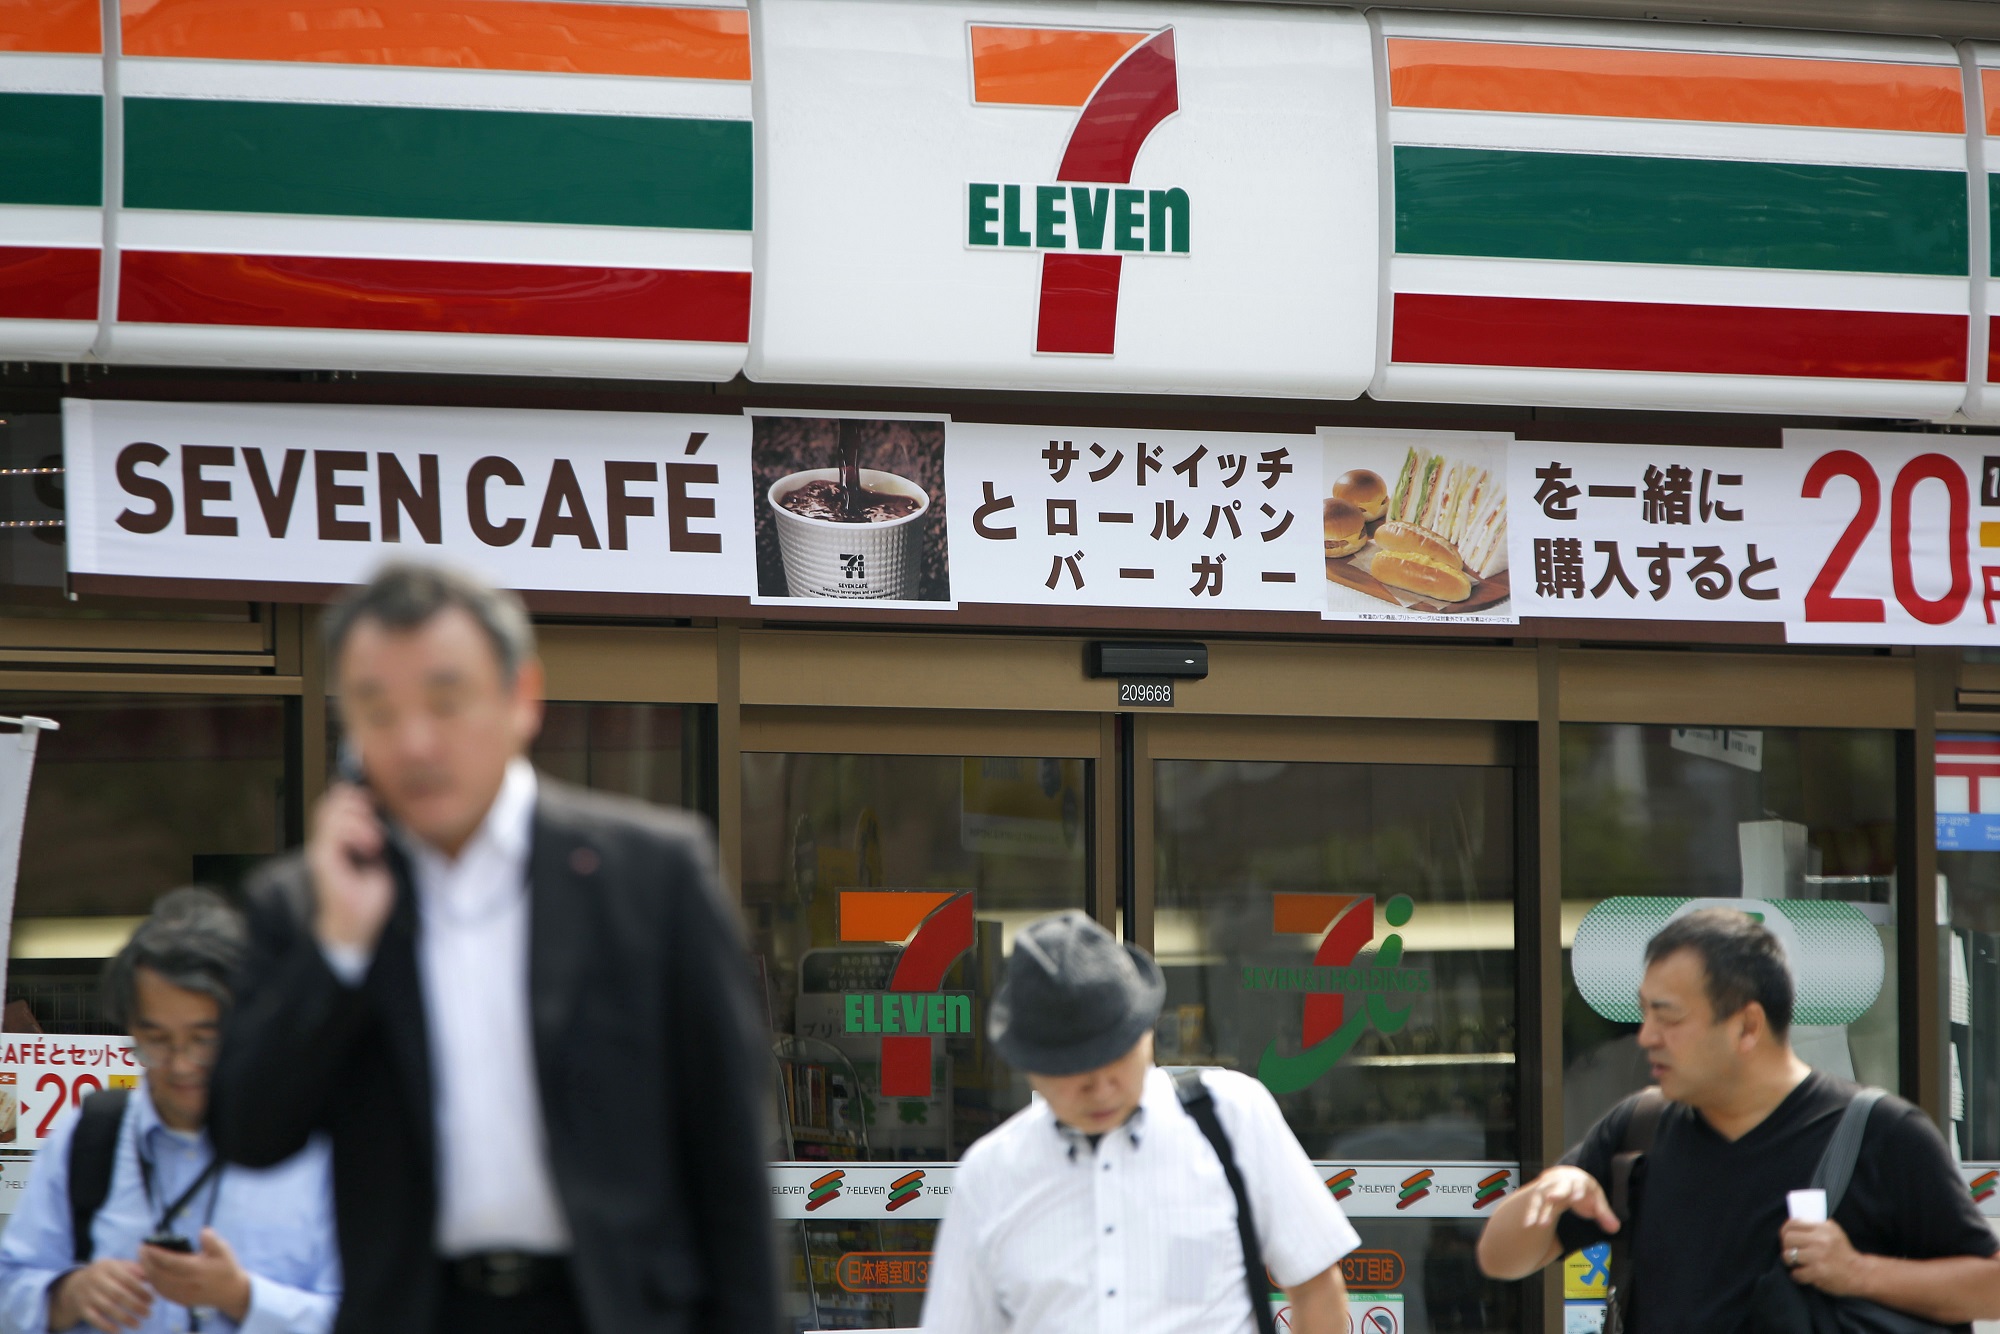 Pedestrians walk in front of a 7-Eleven convenience store in Tokyo, Japan.
